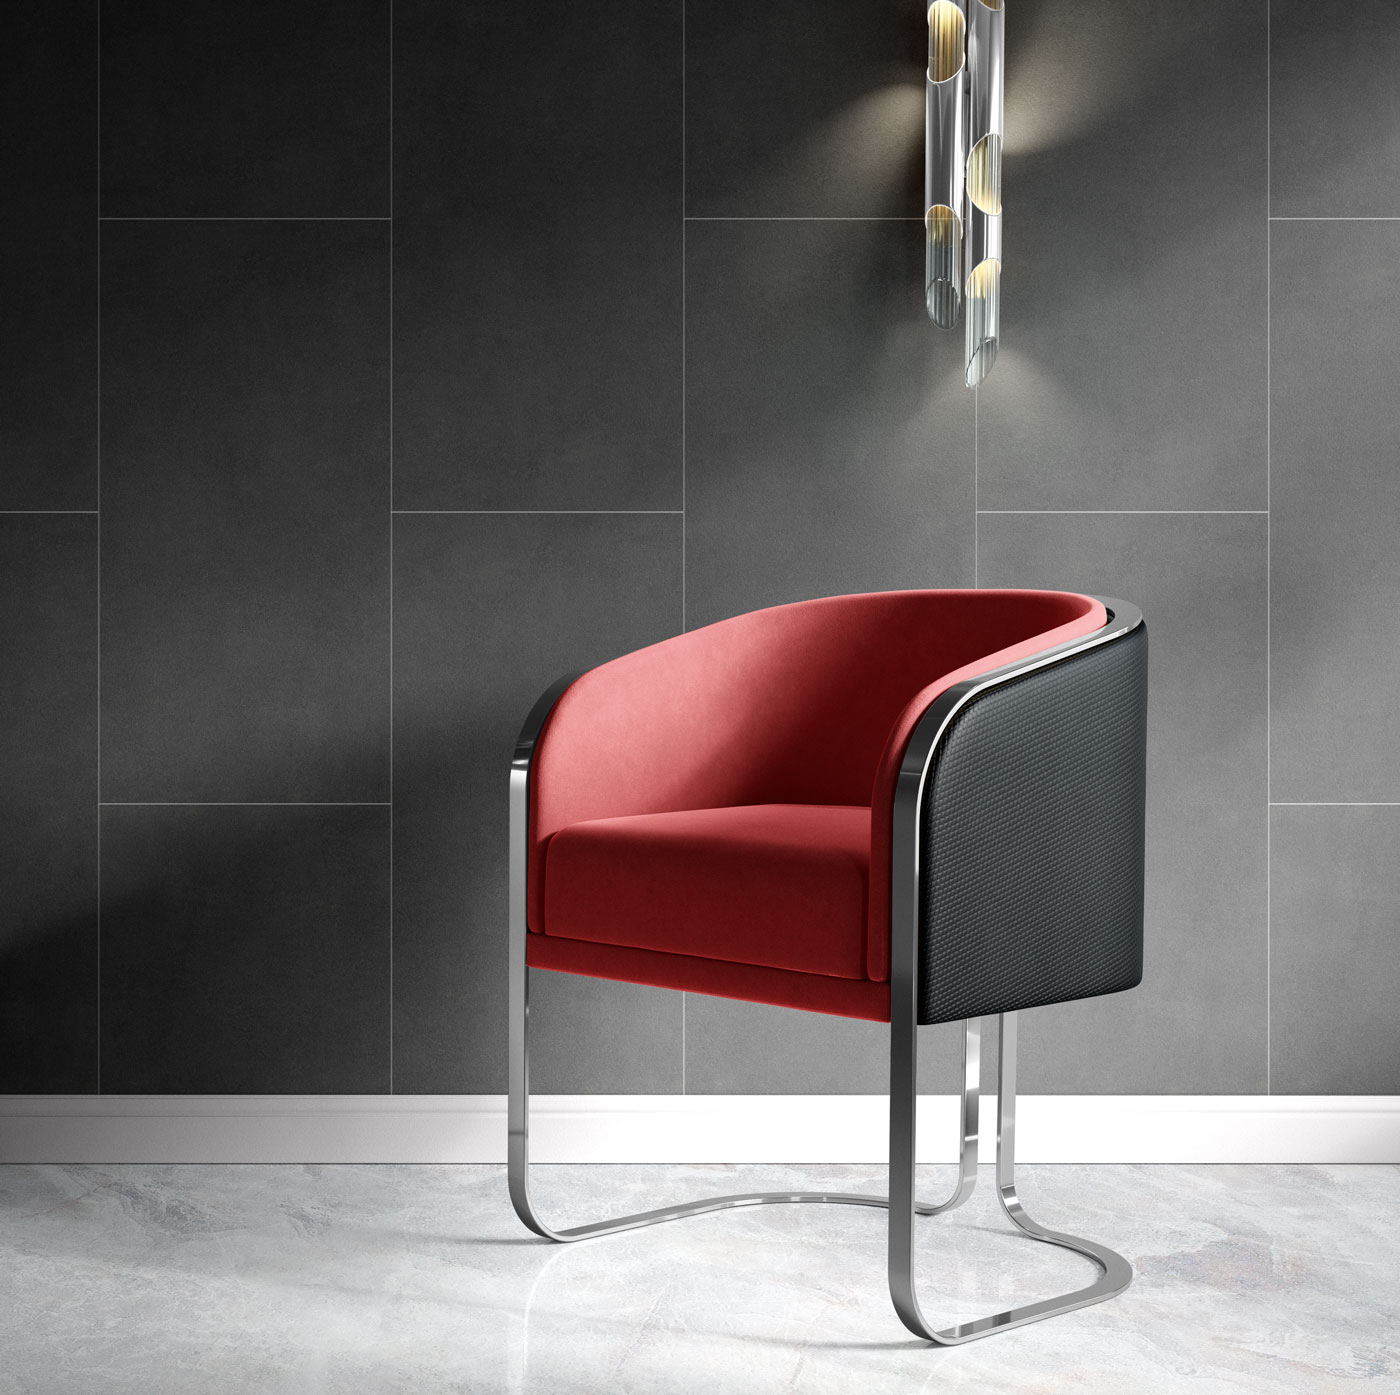 Essential Urban Charcoal Cement Effect Tiles used in a modern bathroom setting with a red chair with modern fittings